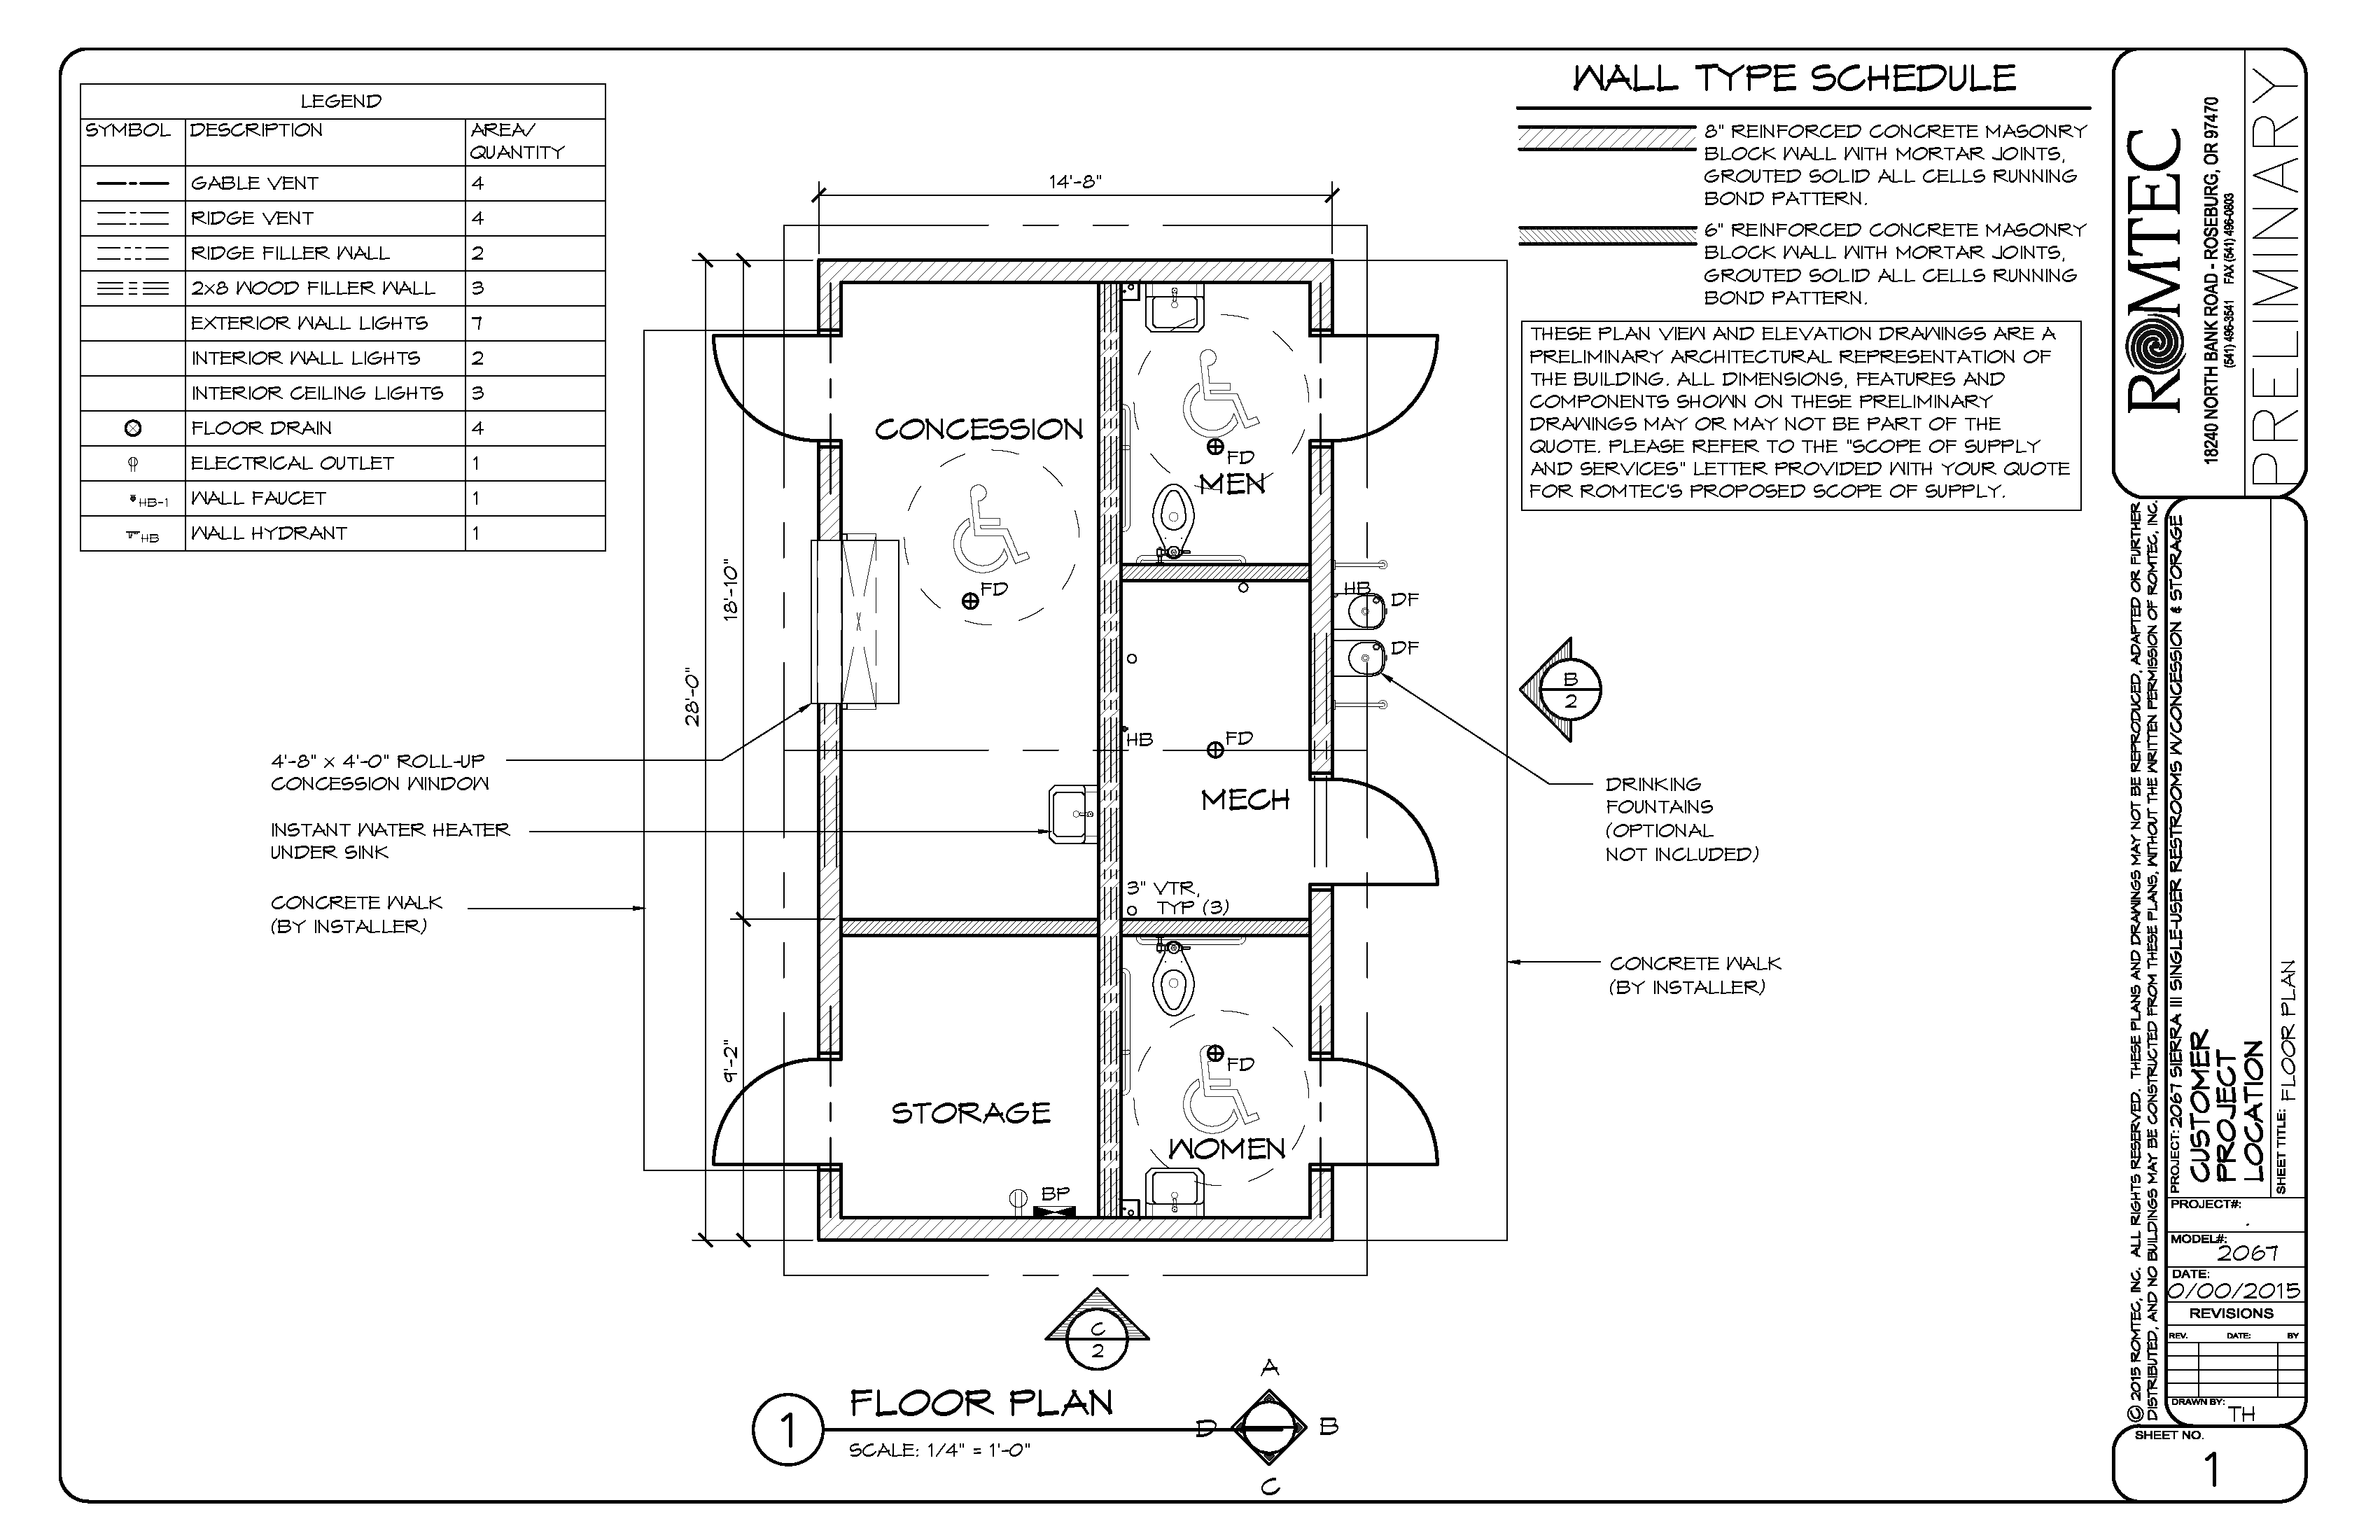 Floor Plan of Large Concession Stand with ADA Restrooms